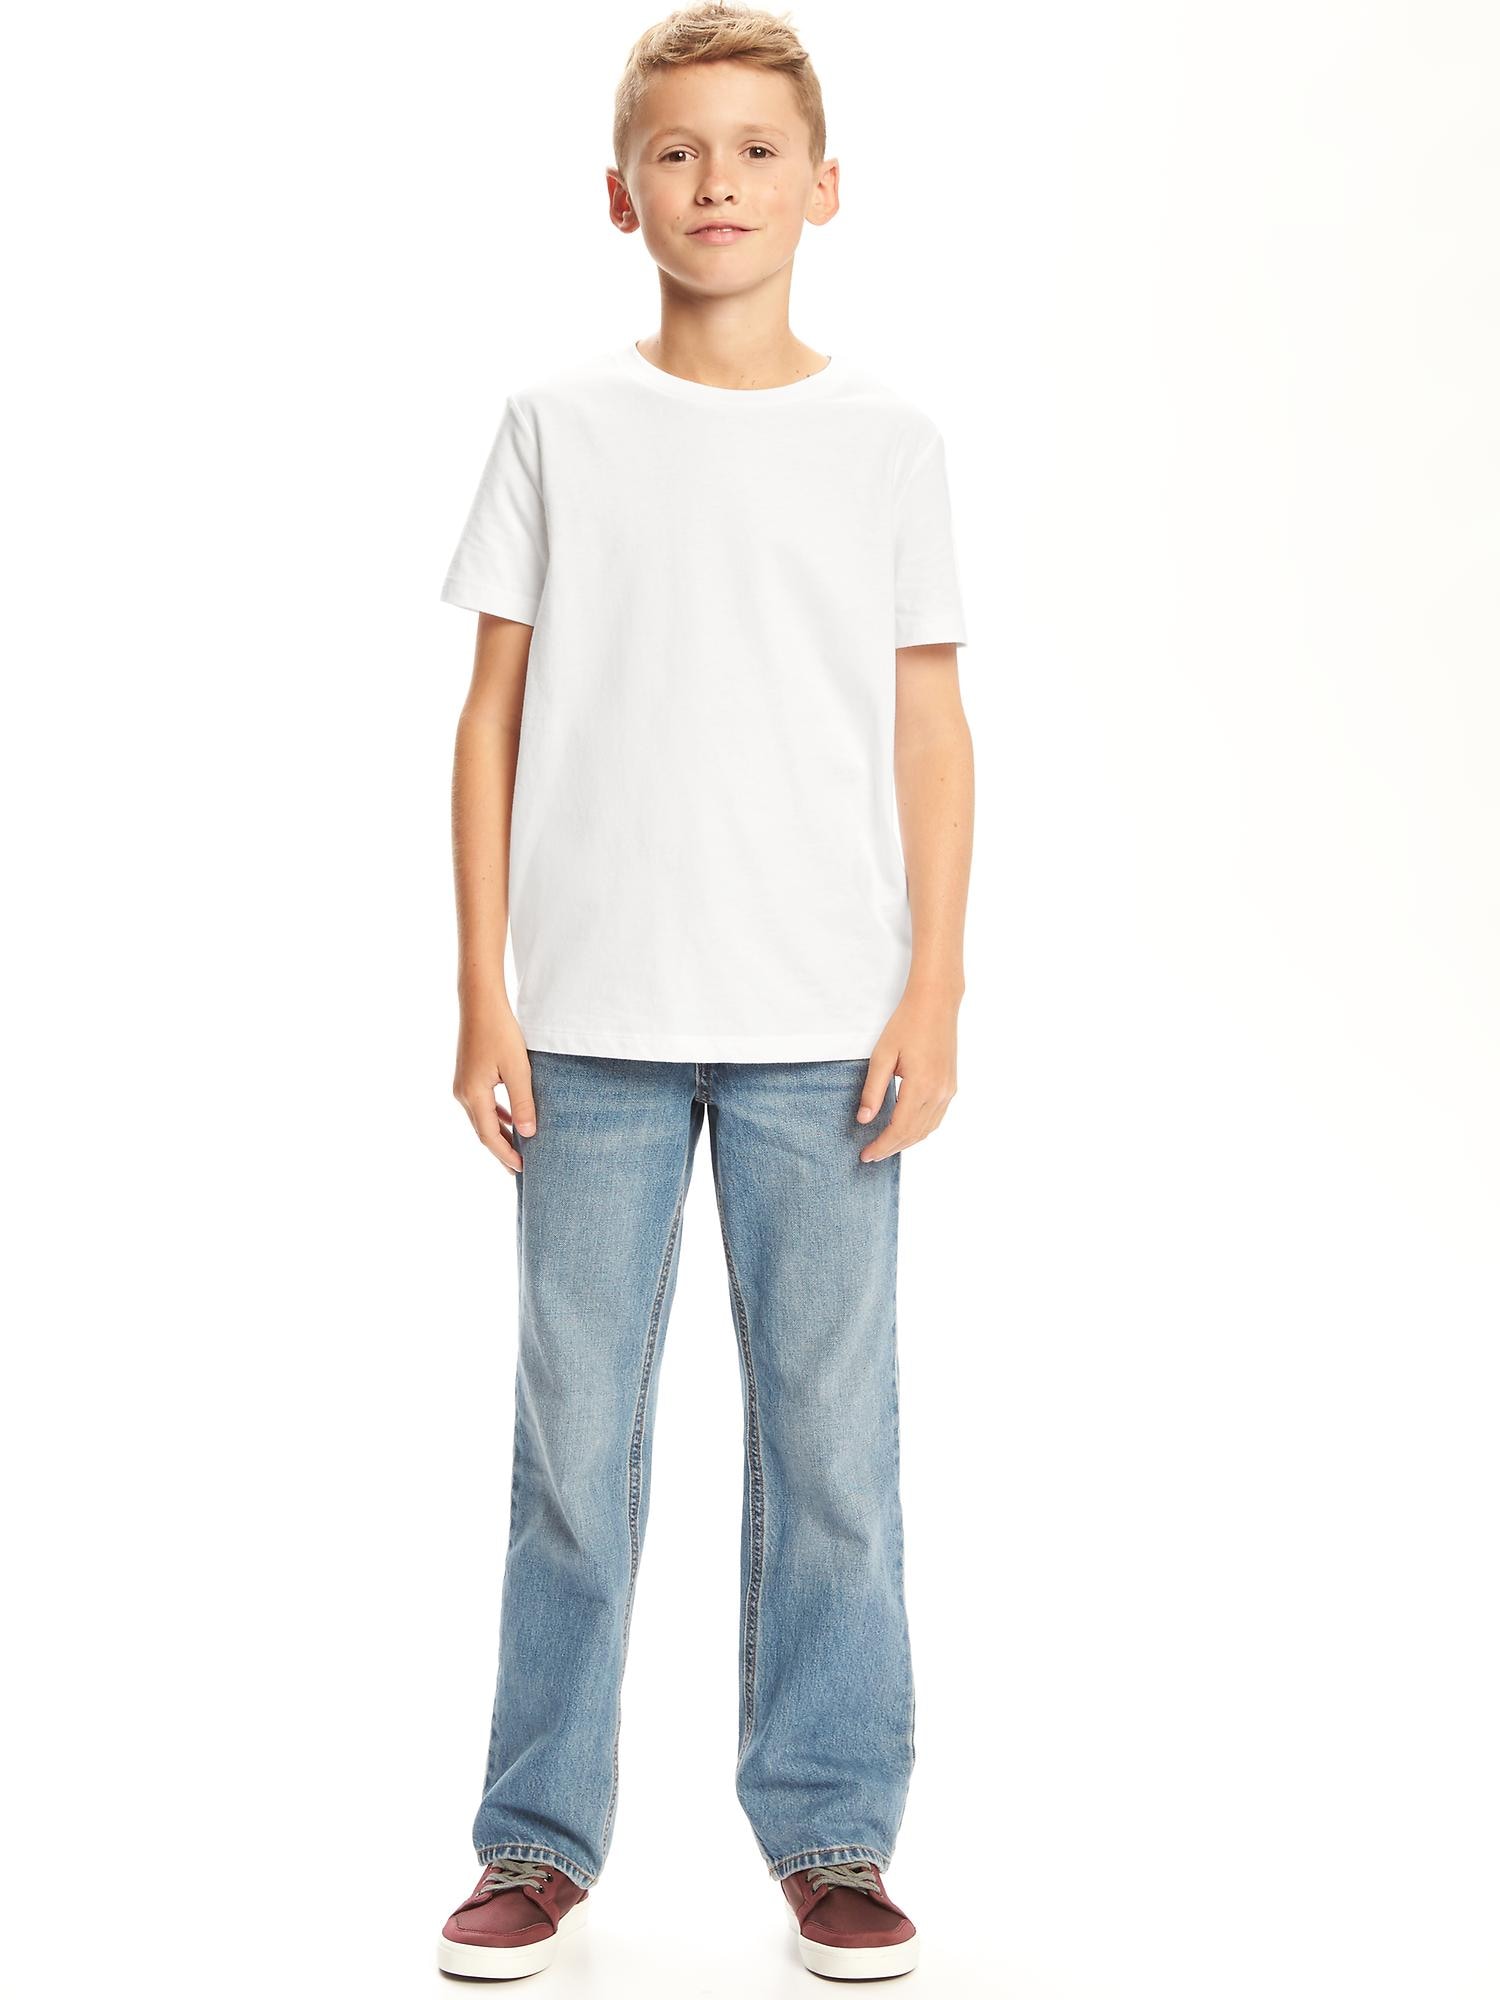 Softest Crew-Neck T-Shirt For Boys | Old Navy